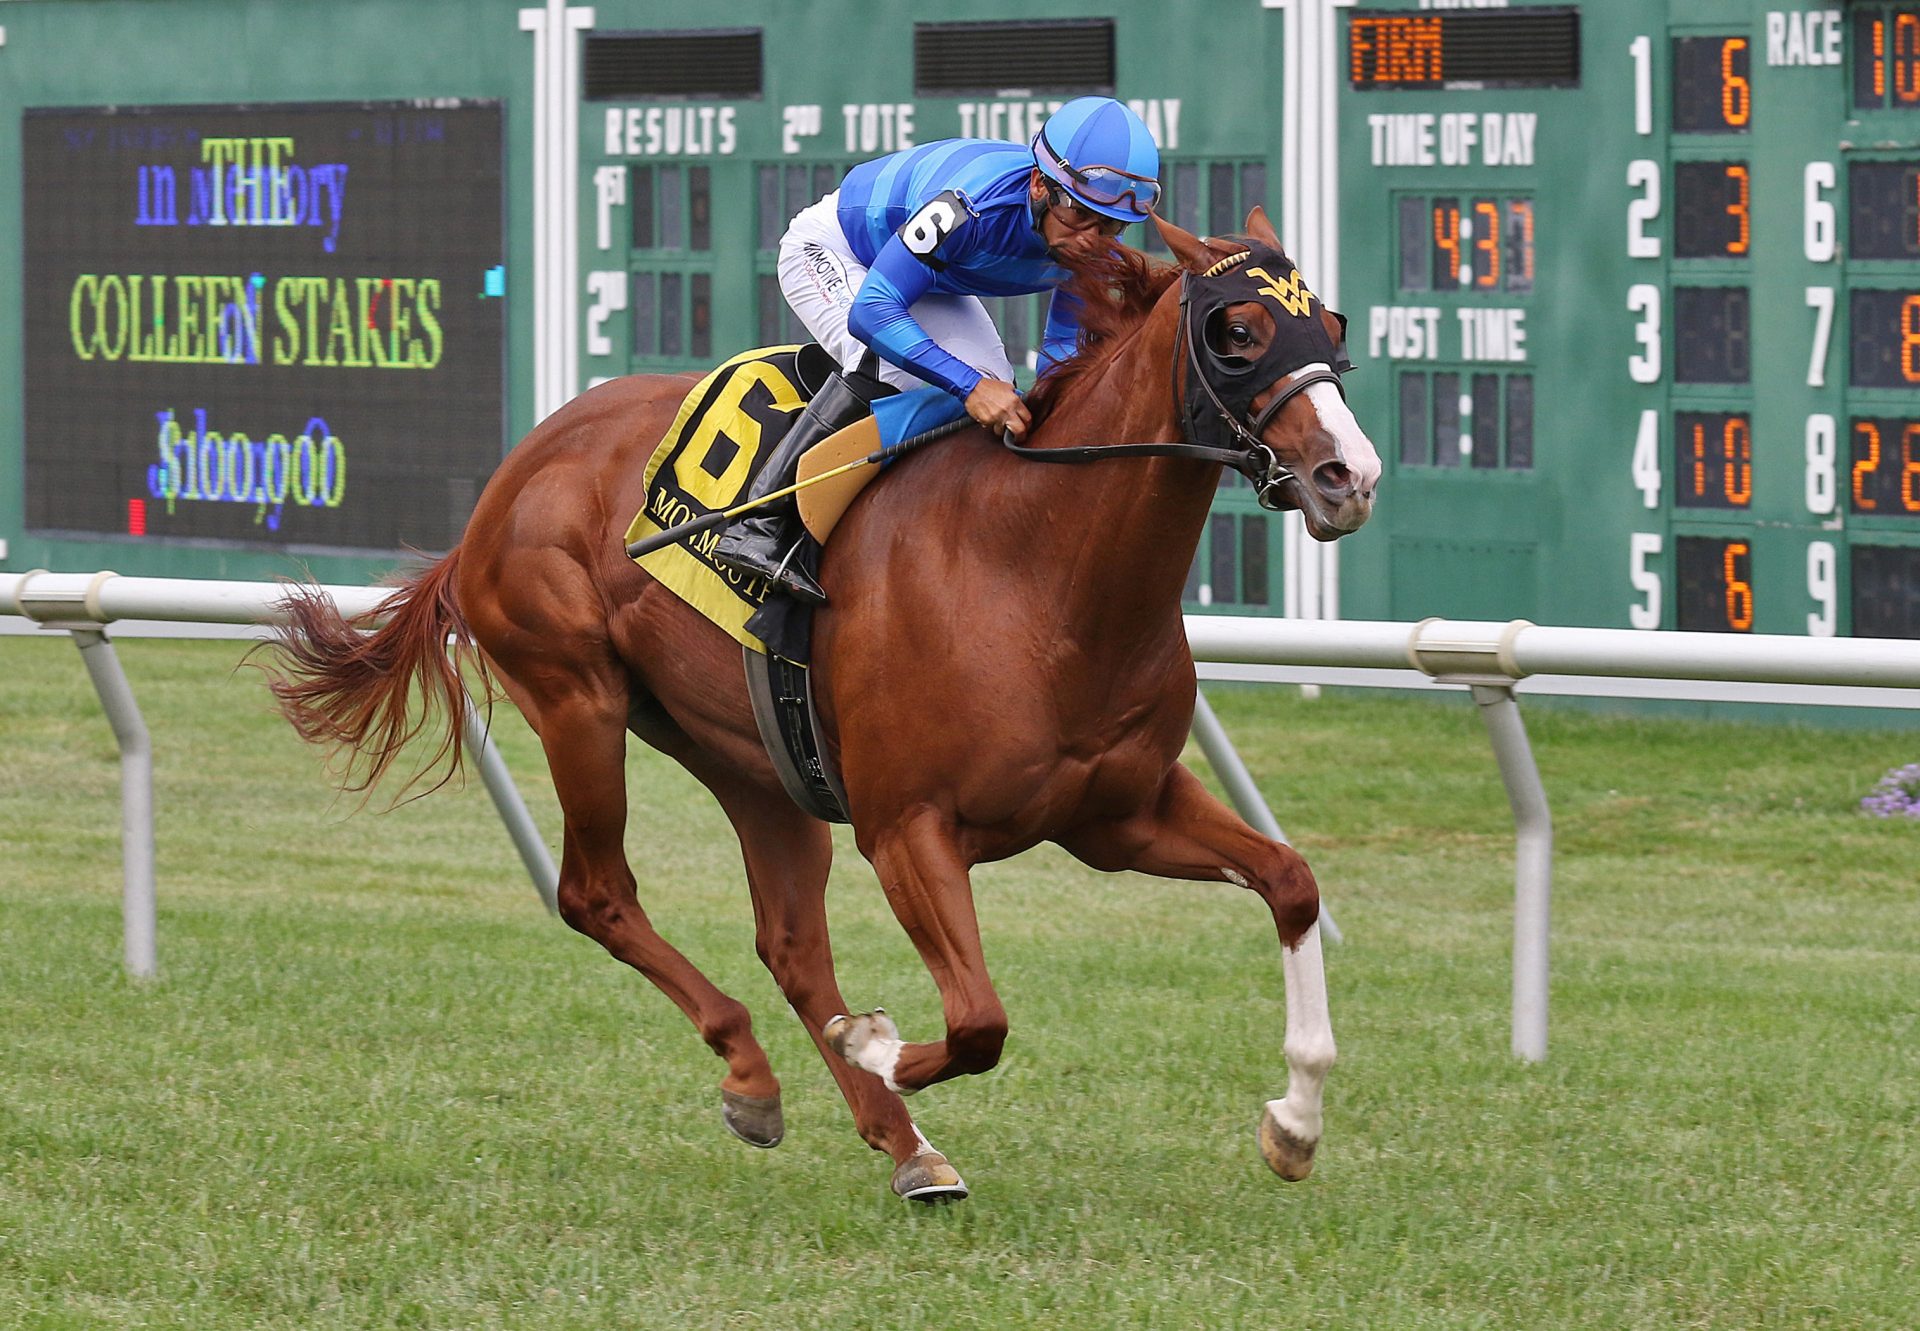 Miss Alacrity (Munnings) wins the Colleen Stakes at Monmouth Park